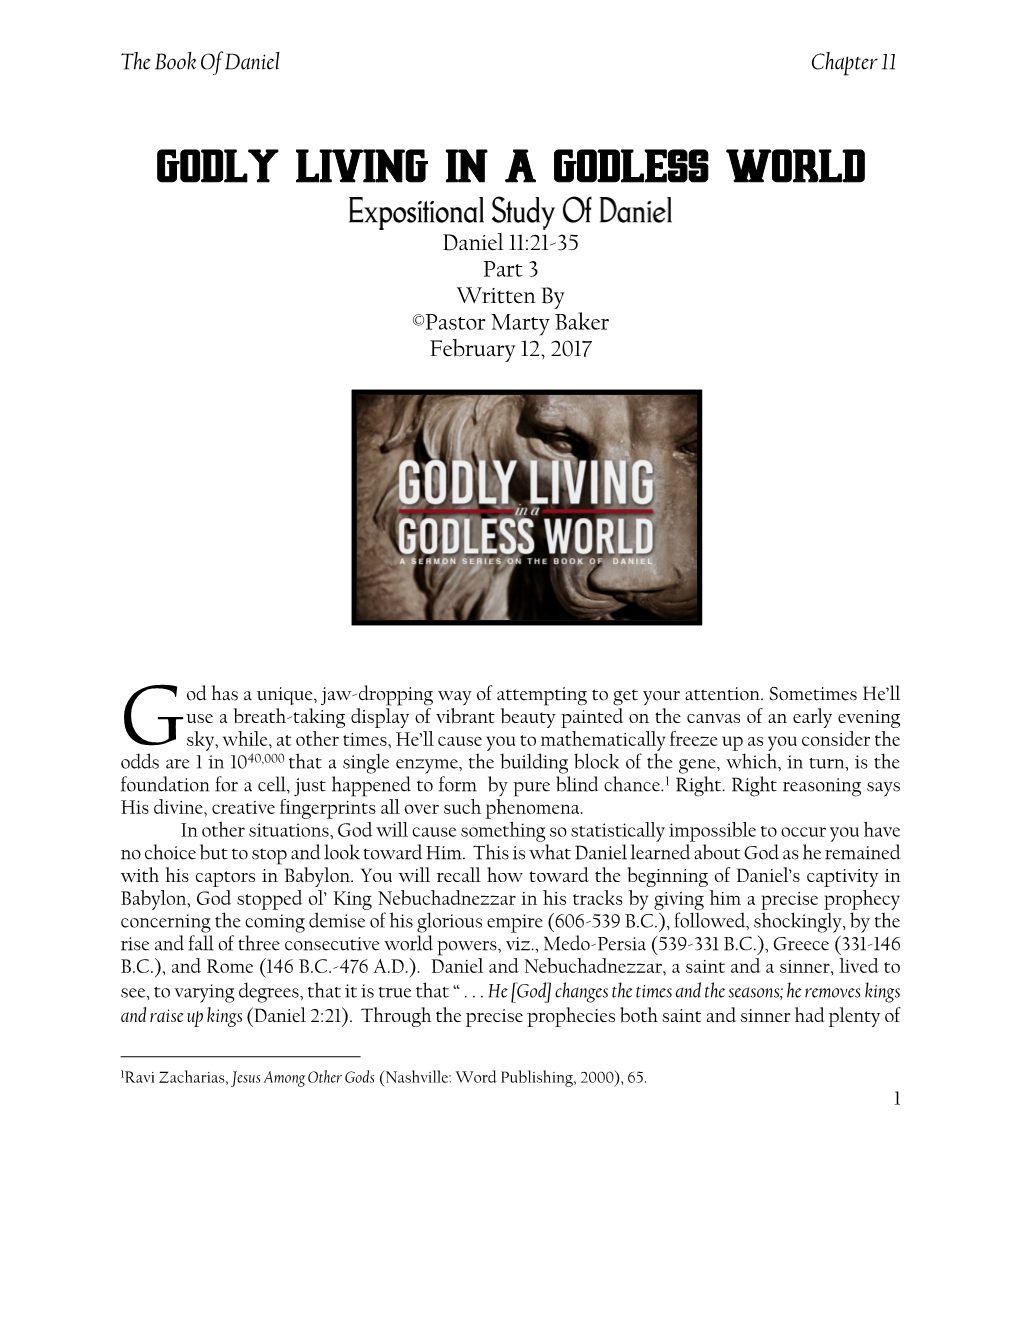 Godly Living in a Godless World